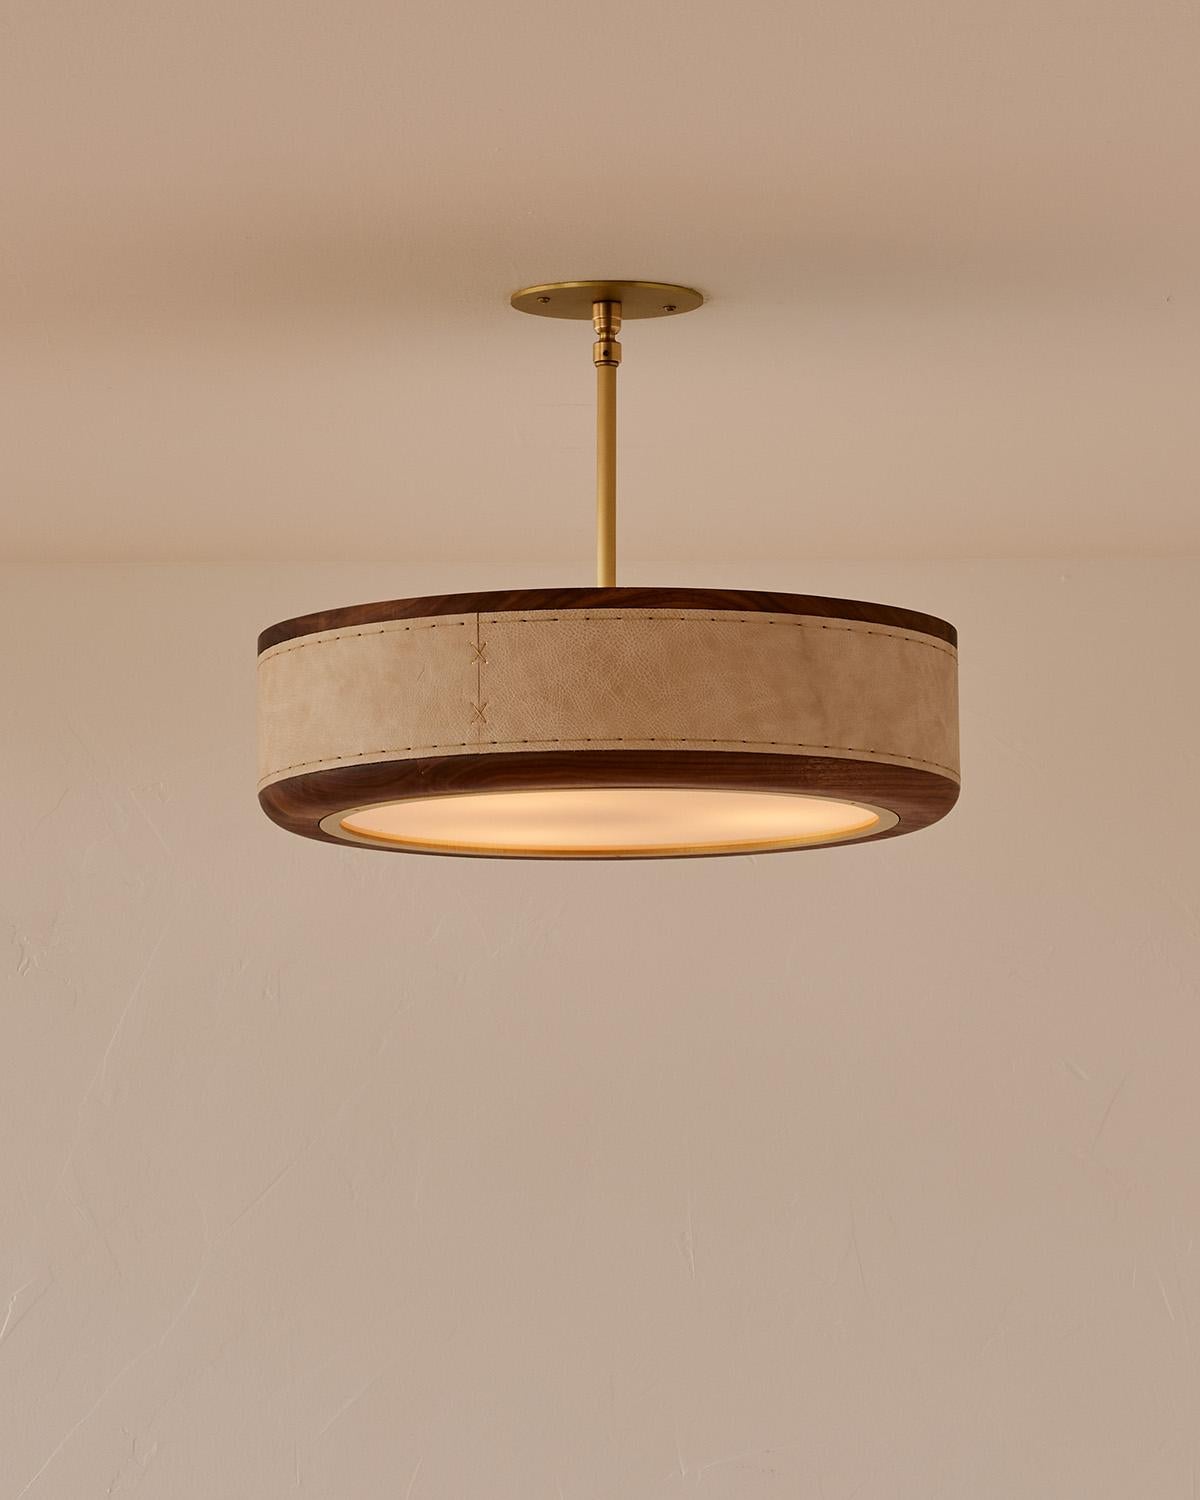 The Nura Ceiling Fixture combines hand-stitched leather over walnut accented by a brass pole and canopy. This fixture can either be hung as a ceiling surface mount or a pendant supported by a brass pole.

OVERALL DIMENSIONS
Shade: 18